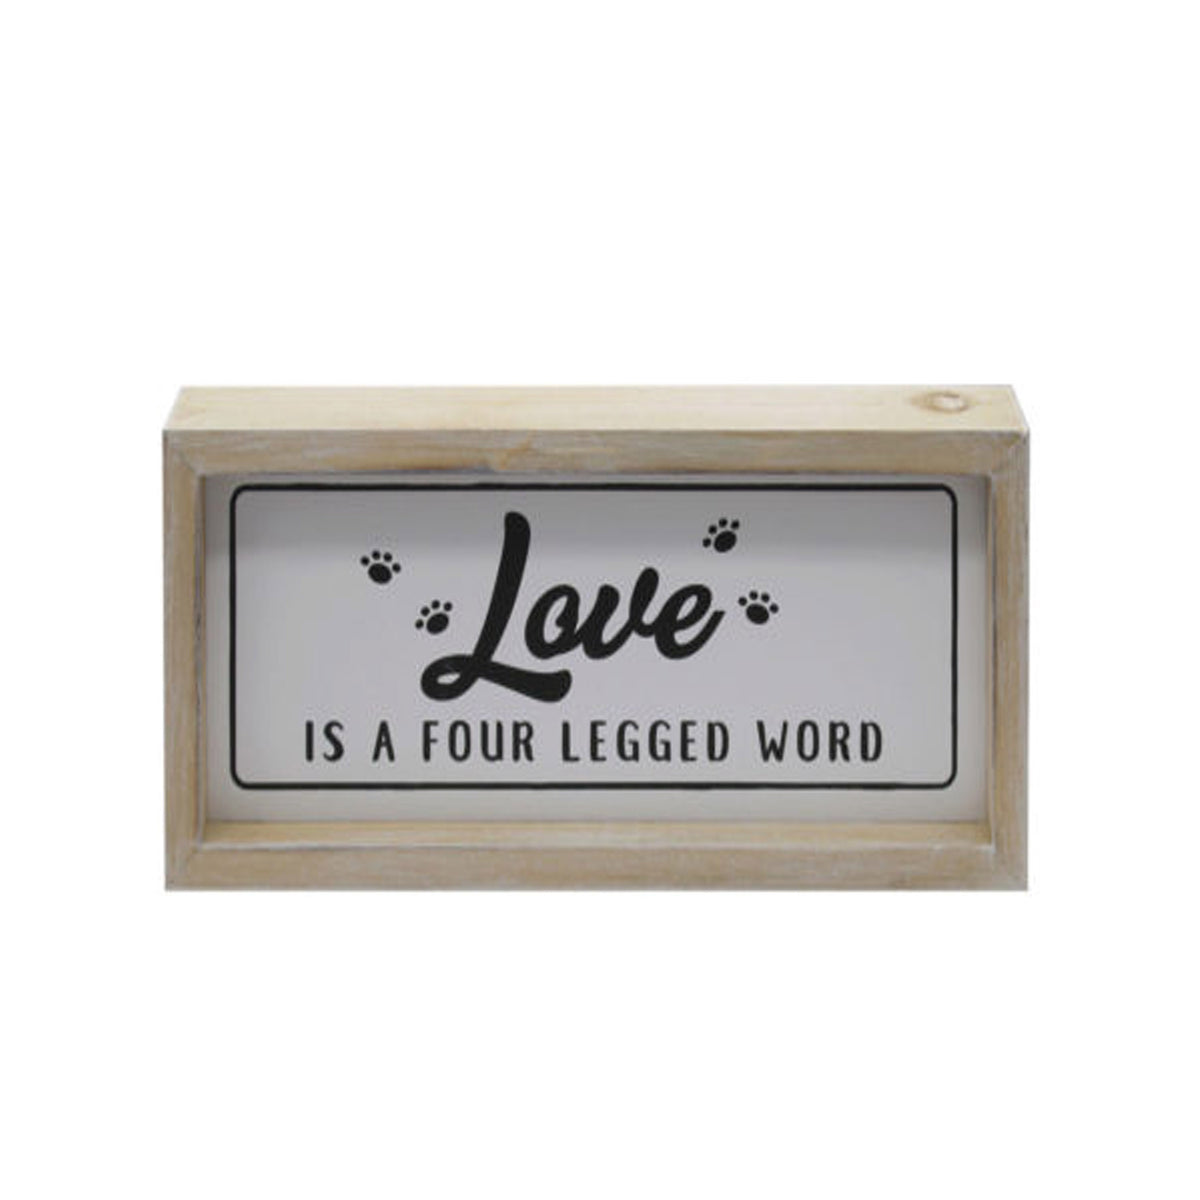 Celebrate the Love for Your Pet with 'Love is a Four-Legged Word' Decorative Wooden Sign MOQ -8 pcs